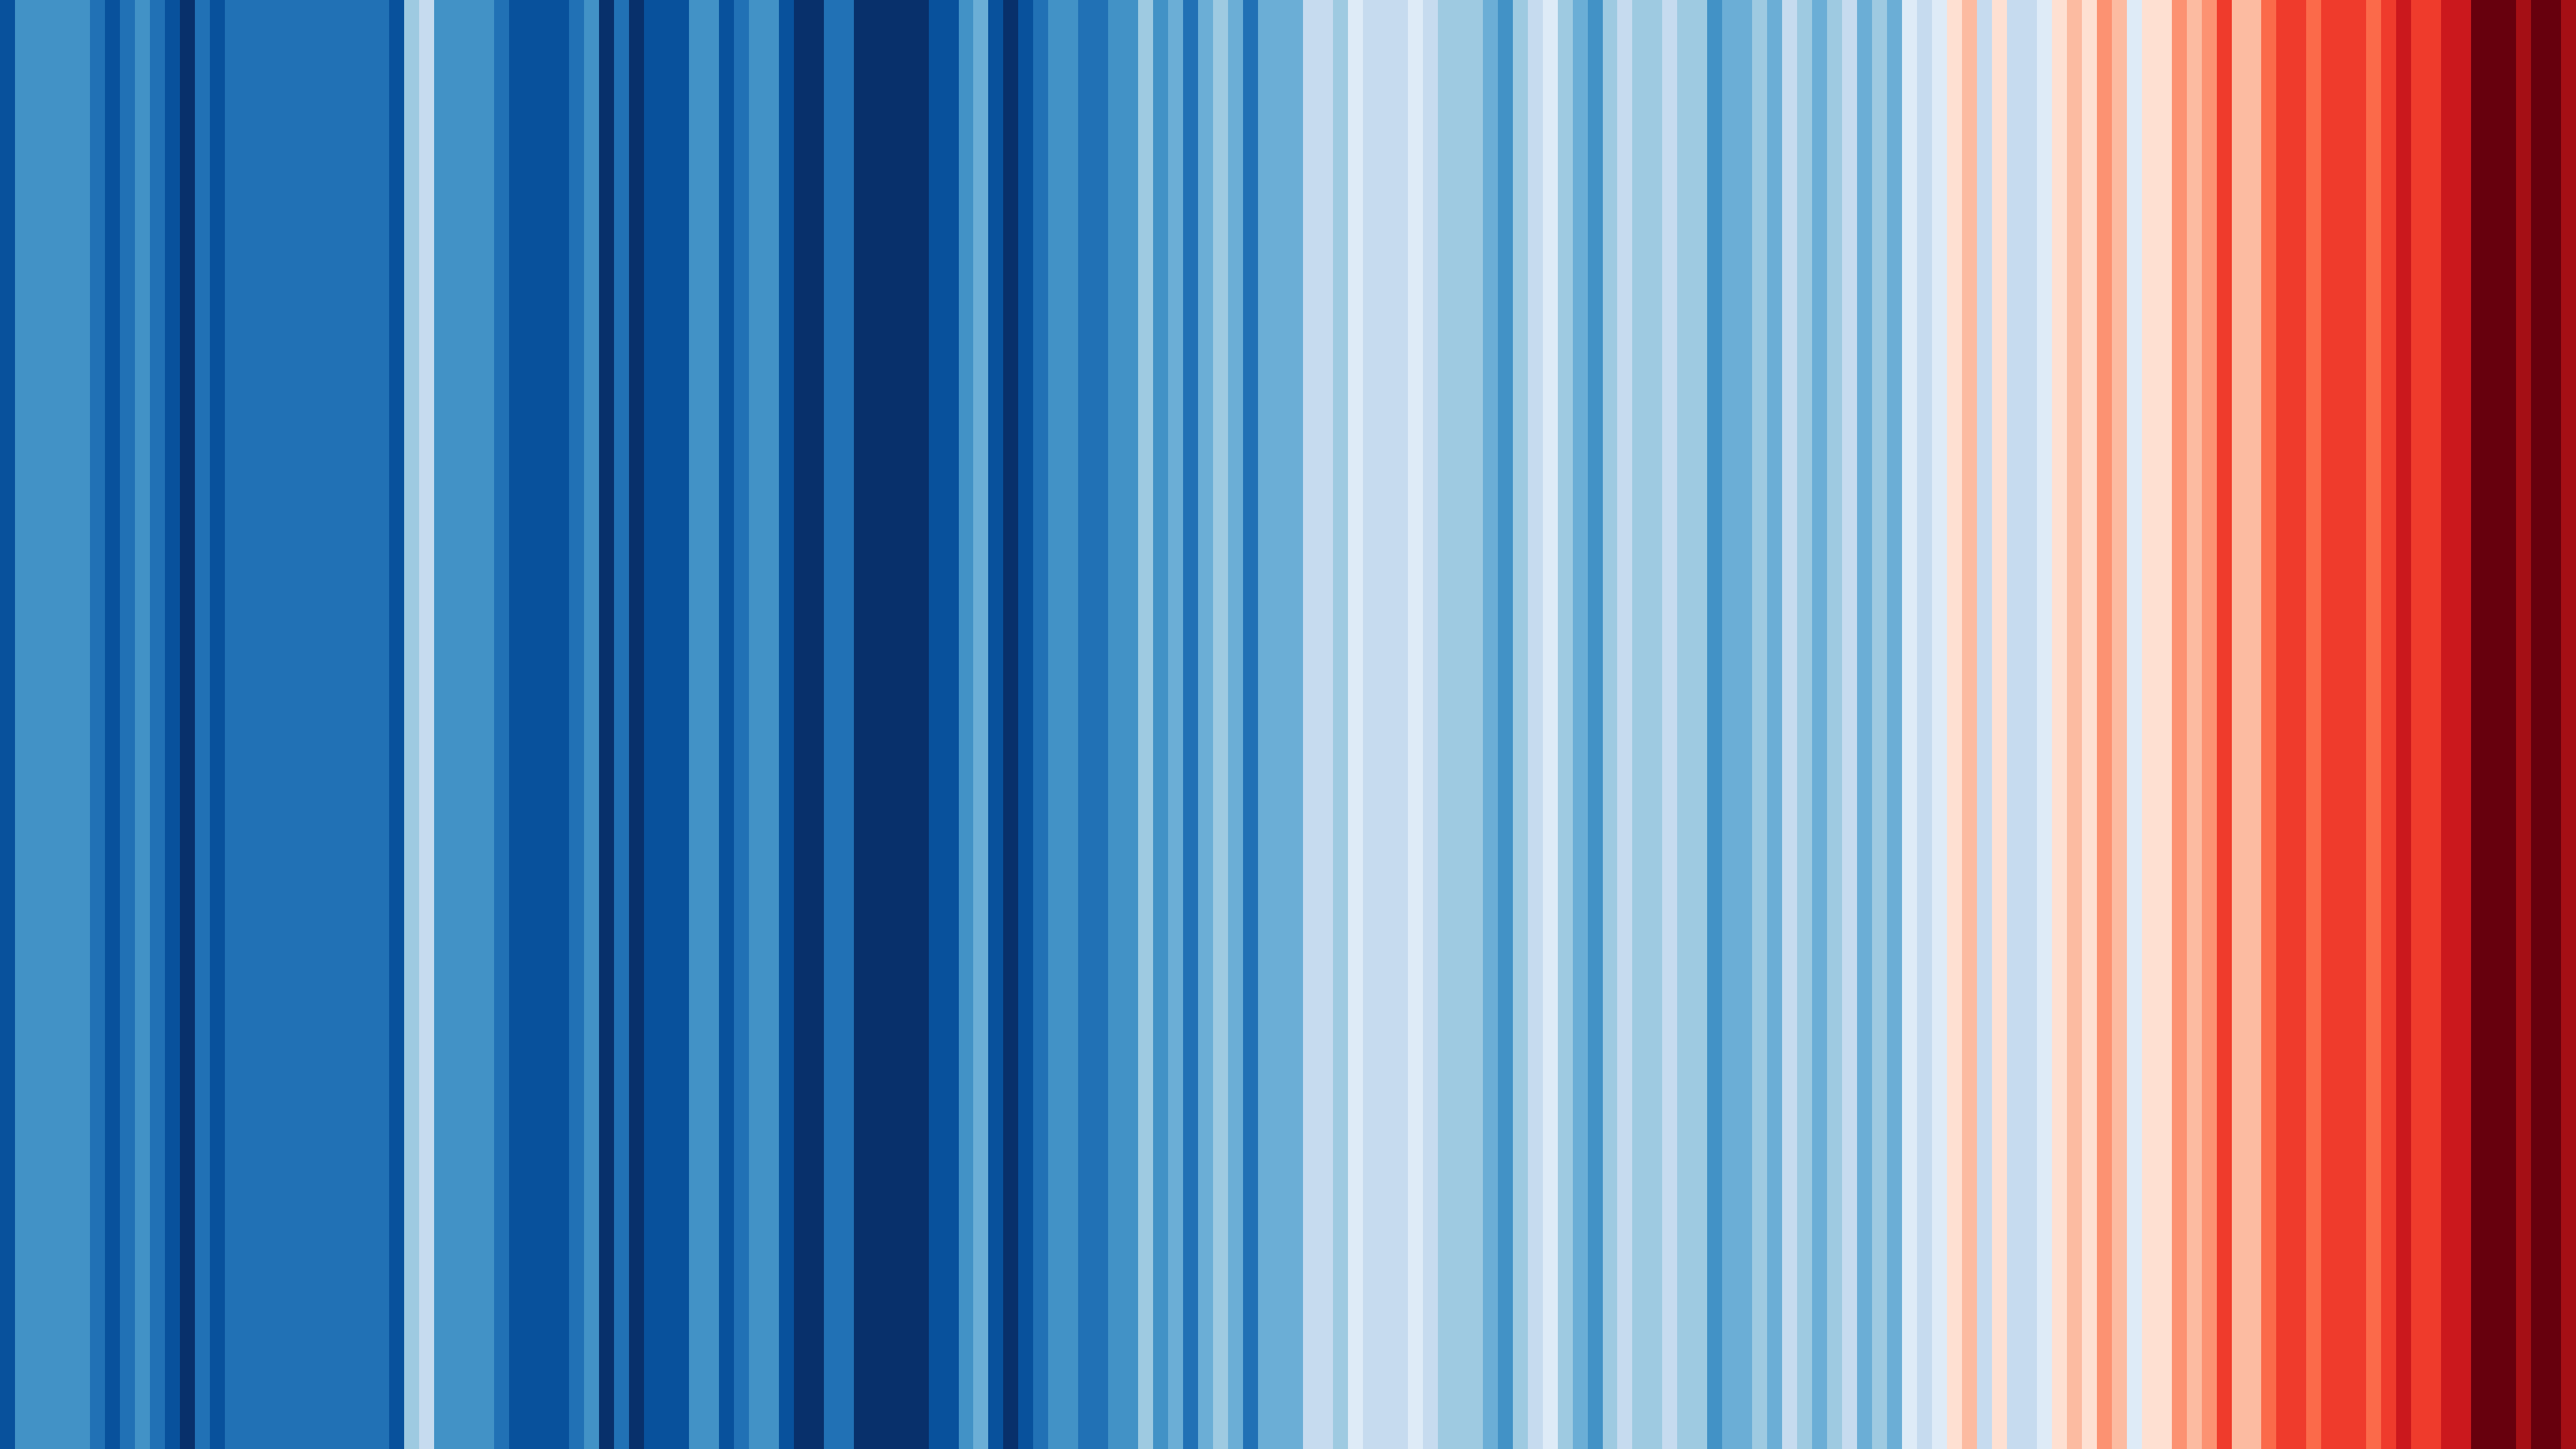 Stripes chart showing increase in global temperatures since 1850